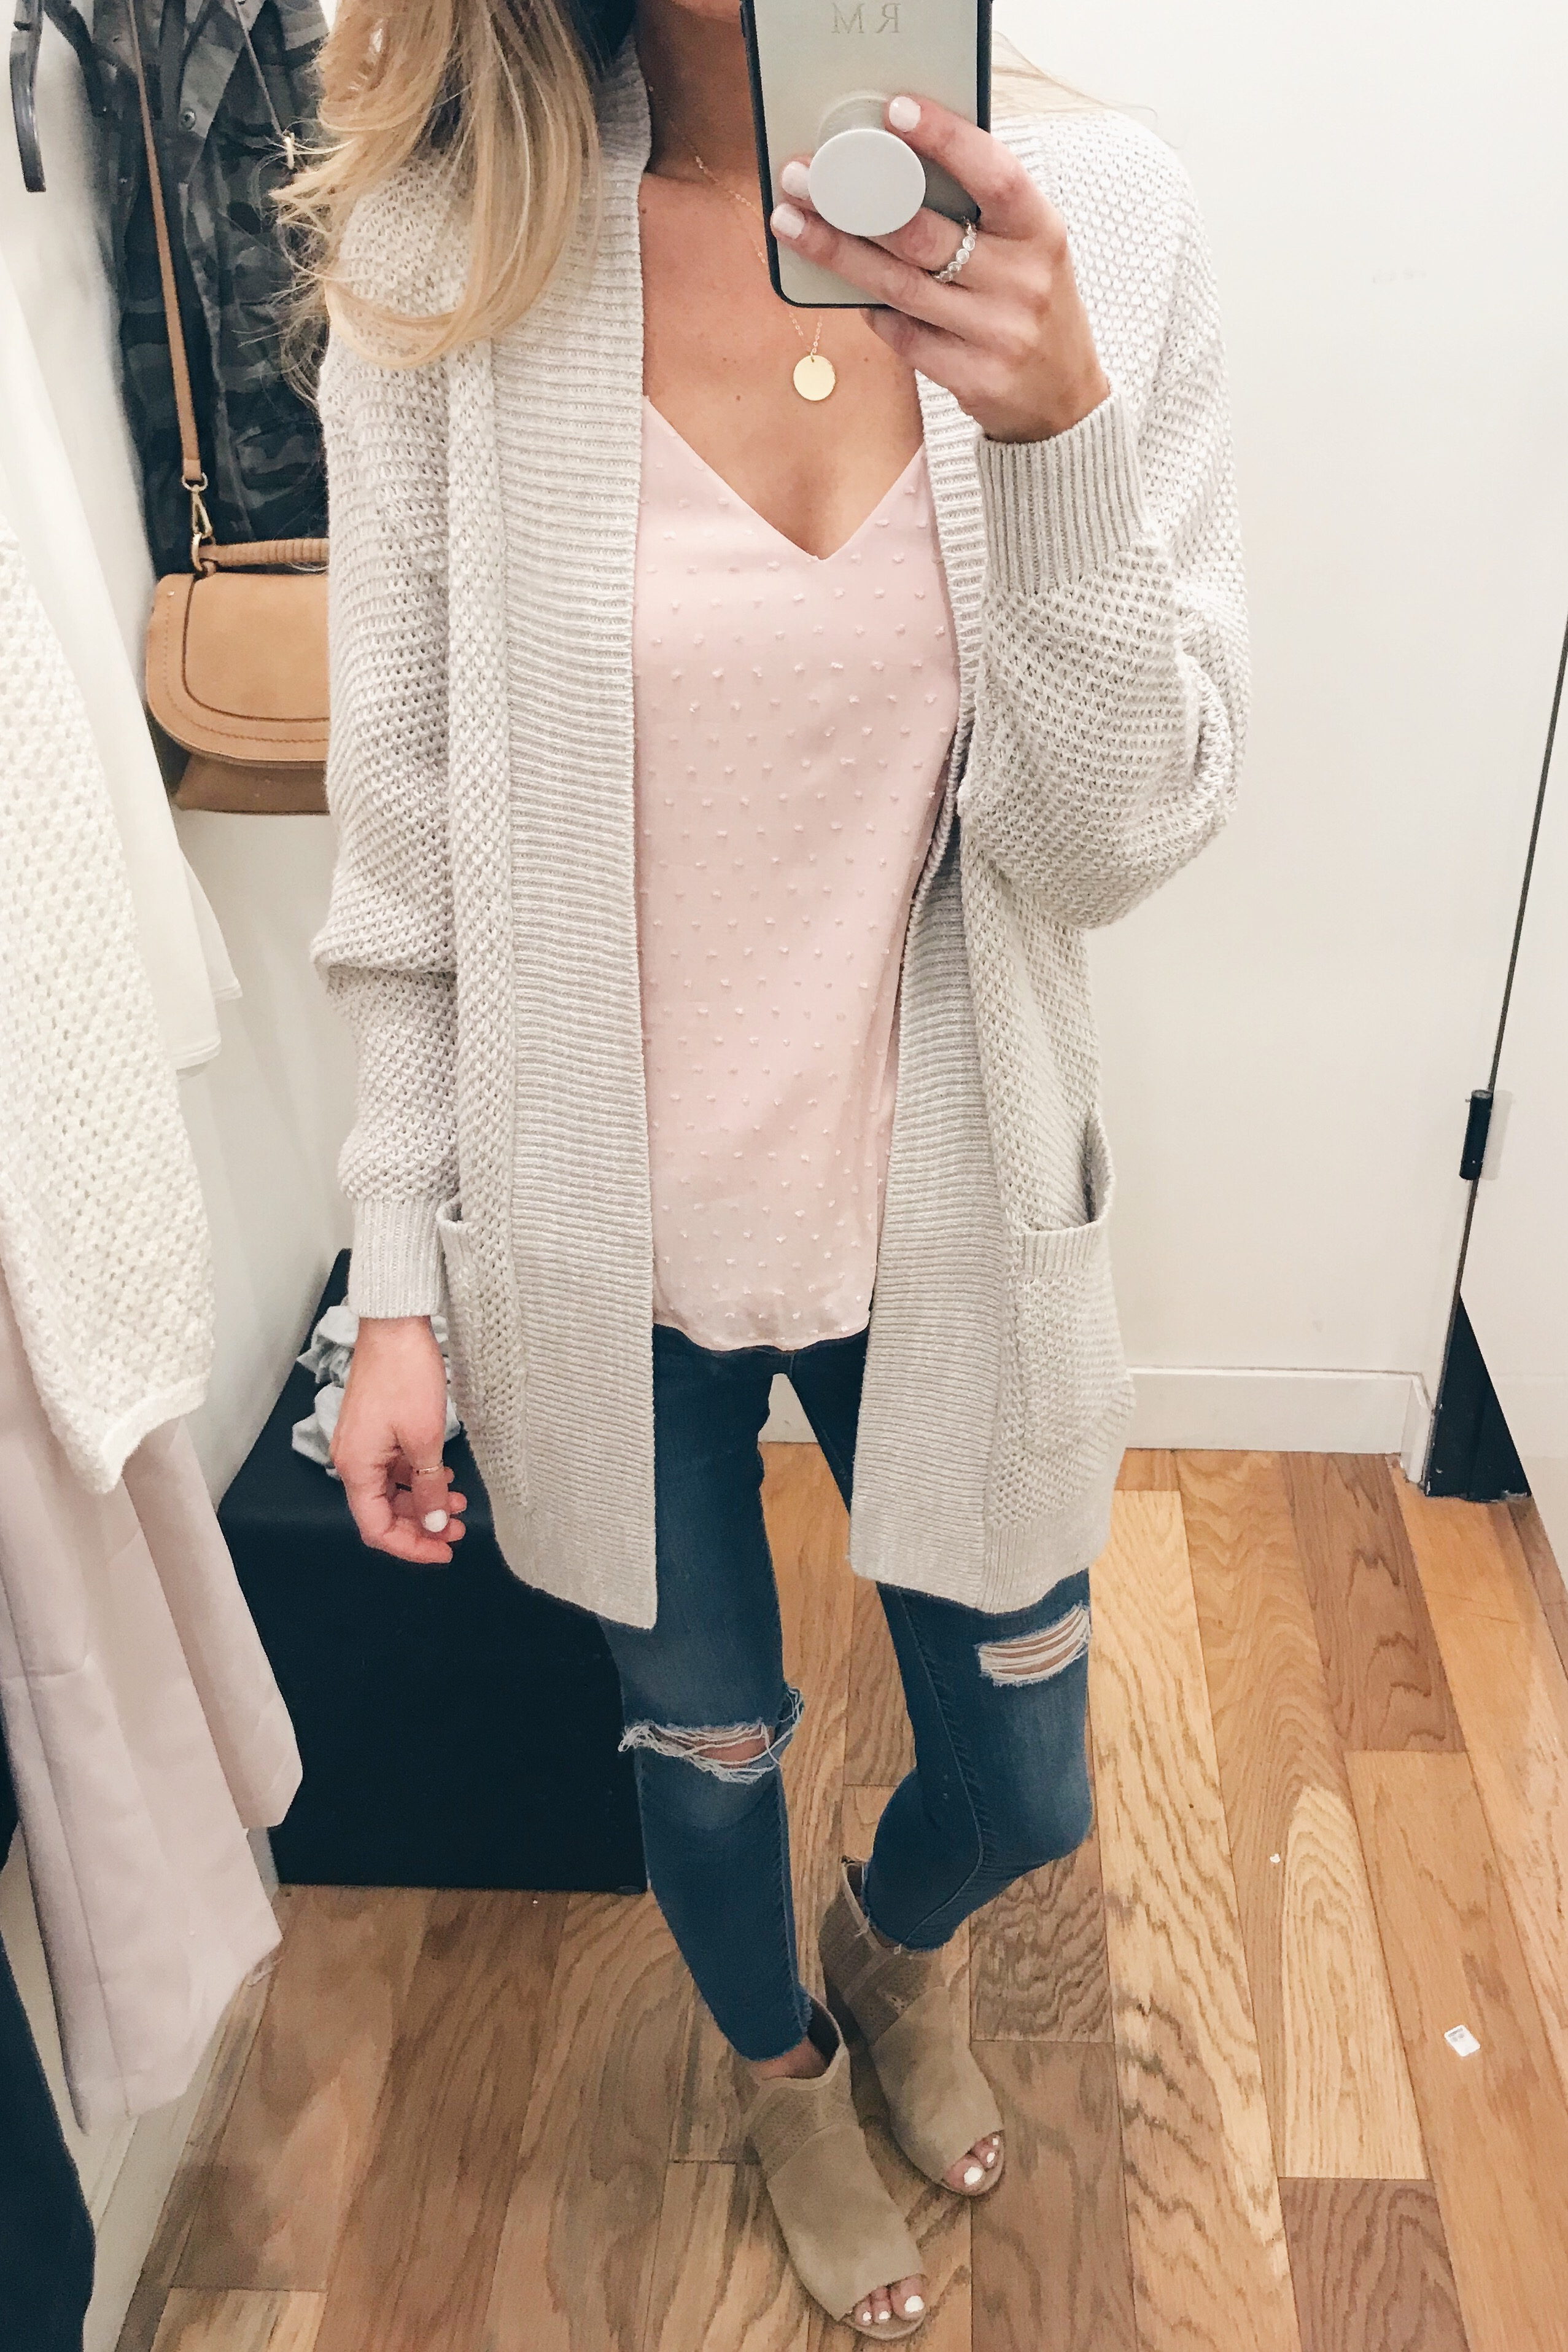 express try on - cardigan and blush pink camisole Pinteresting Plans blog